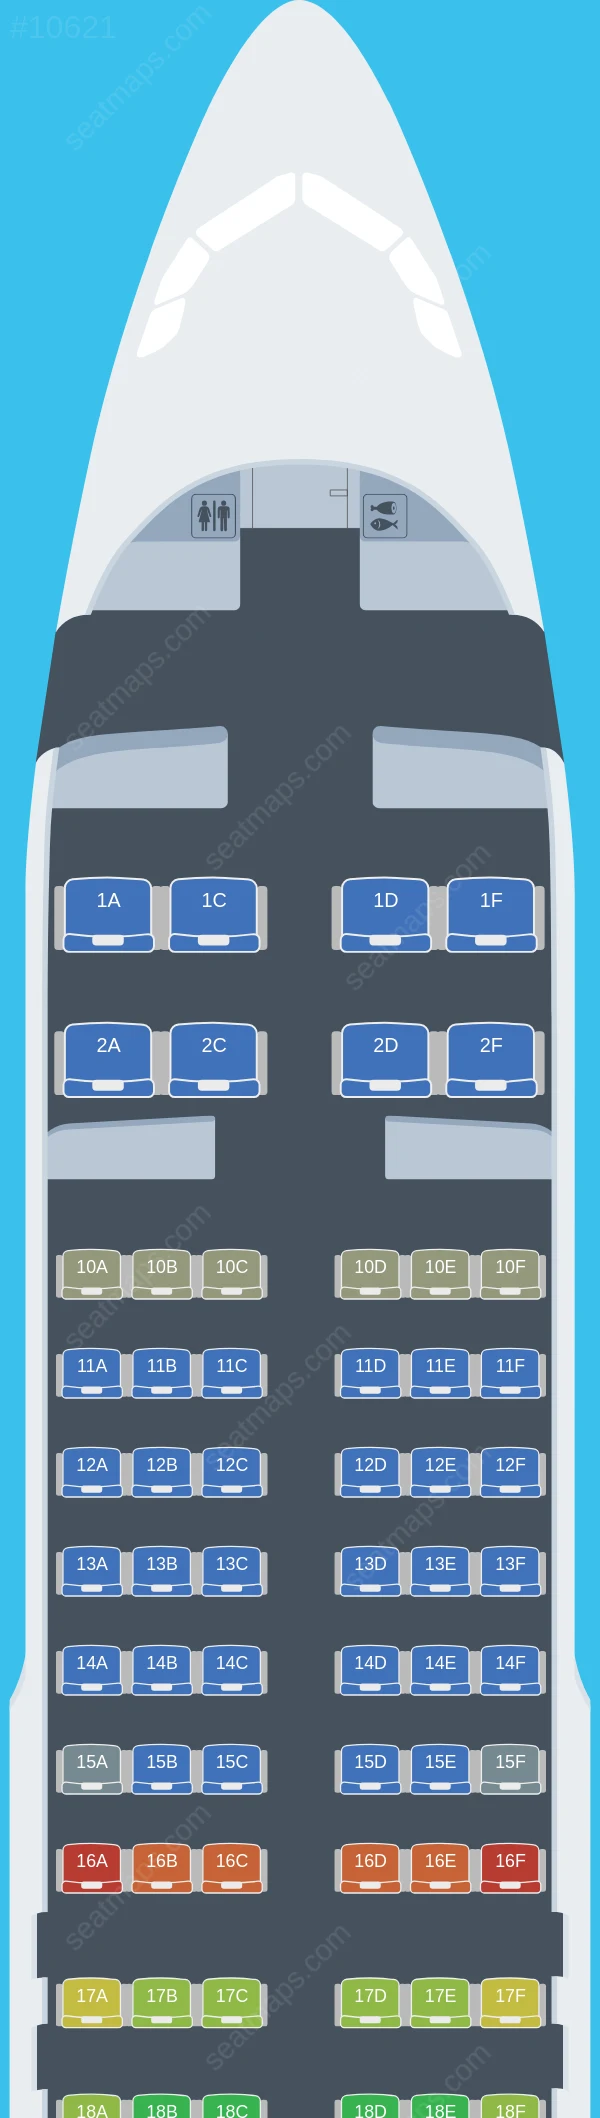 FITS Aviation Airbus A320-200 seatmap preview